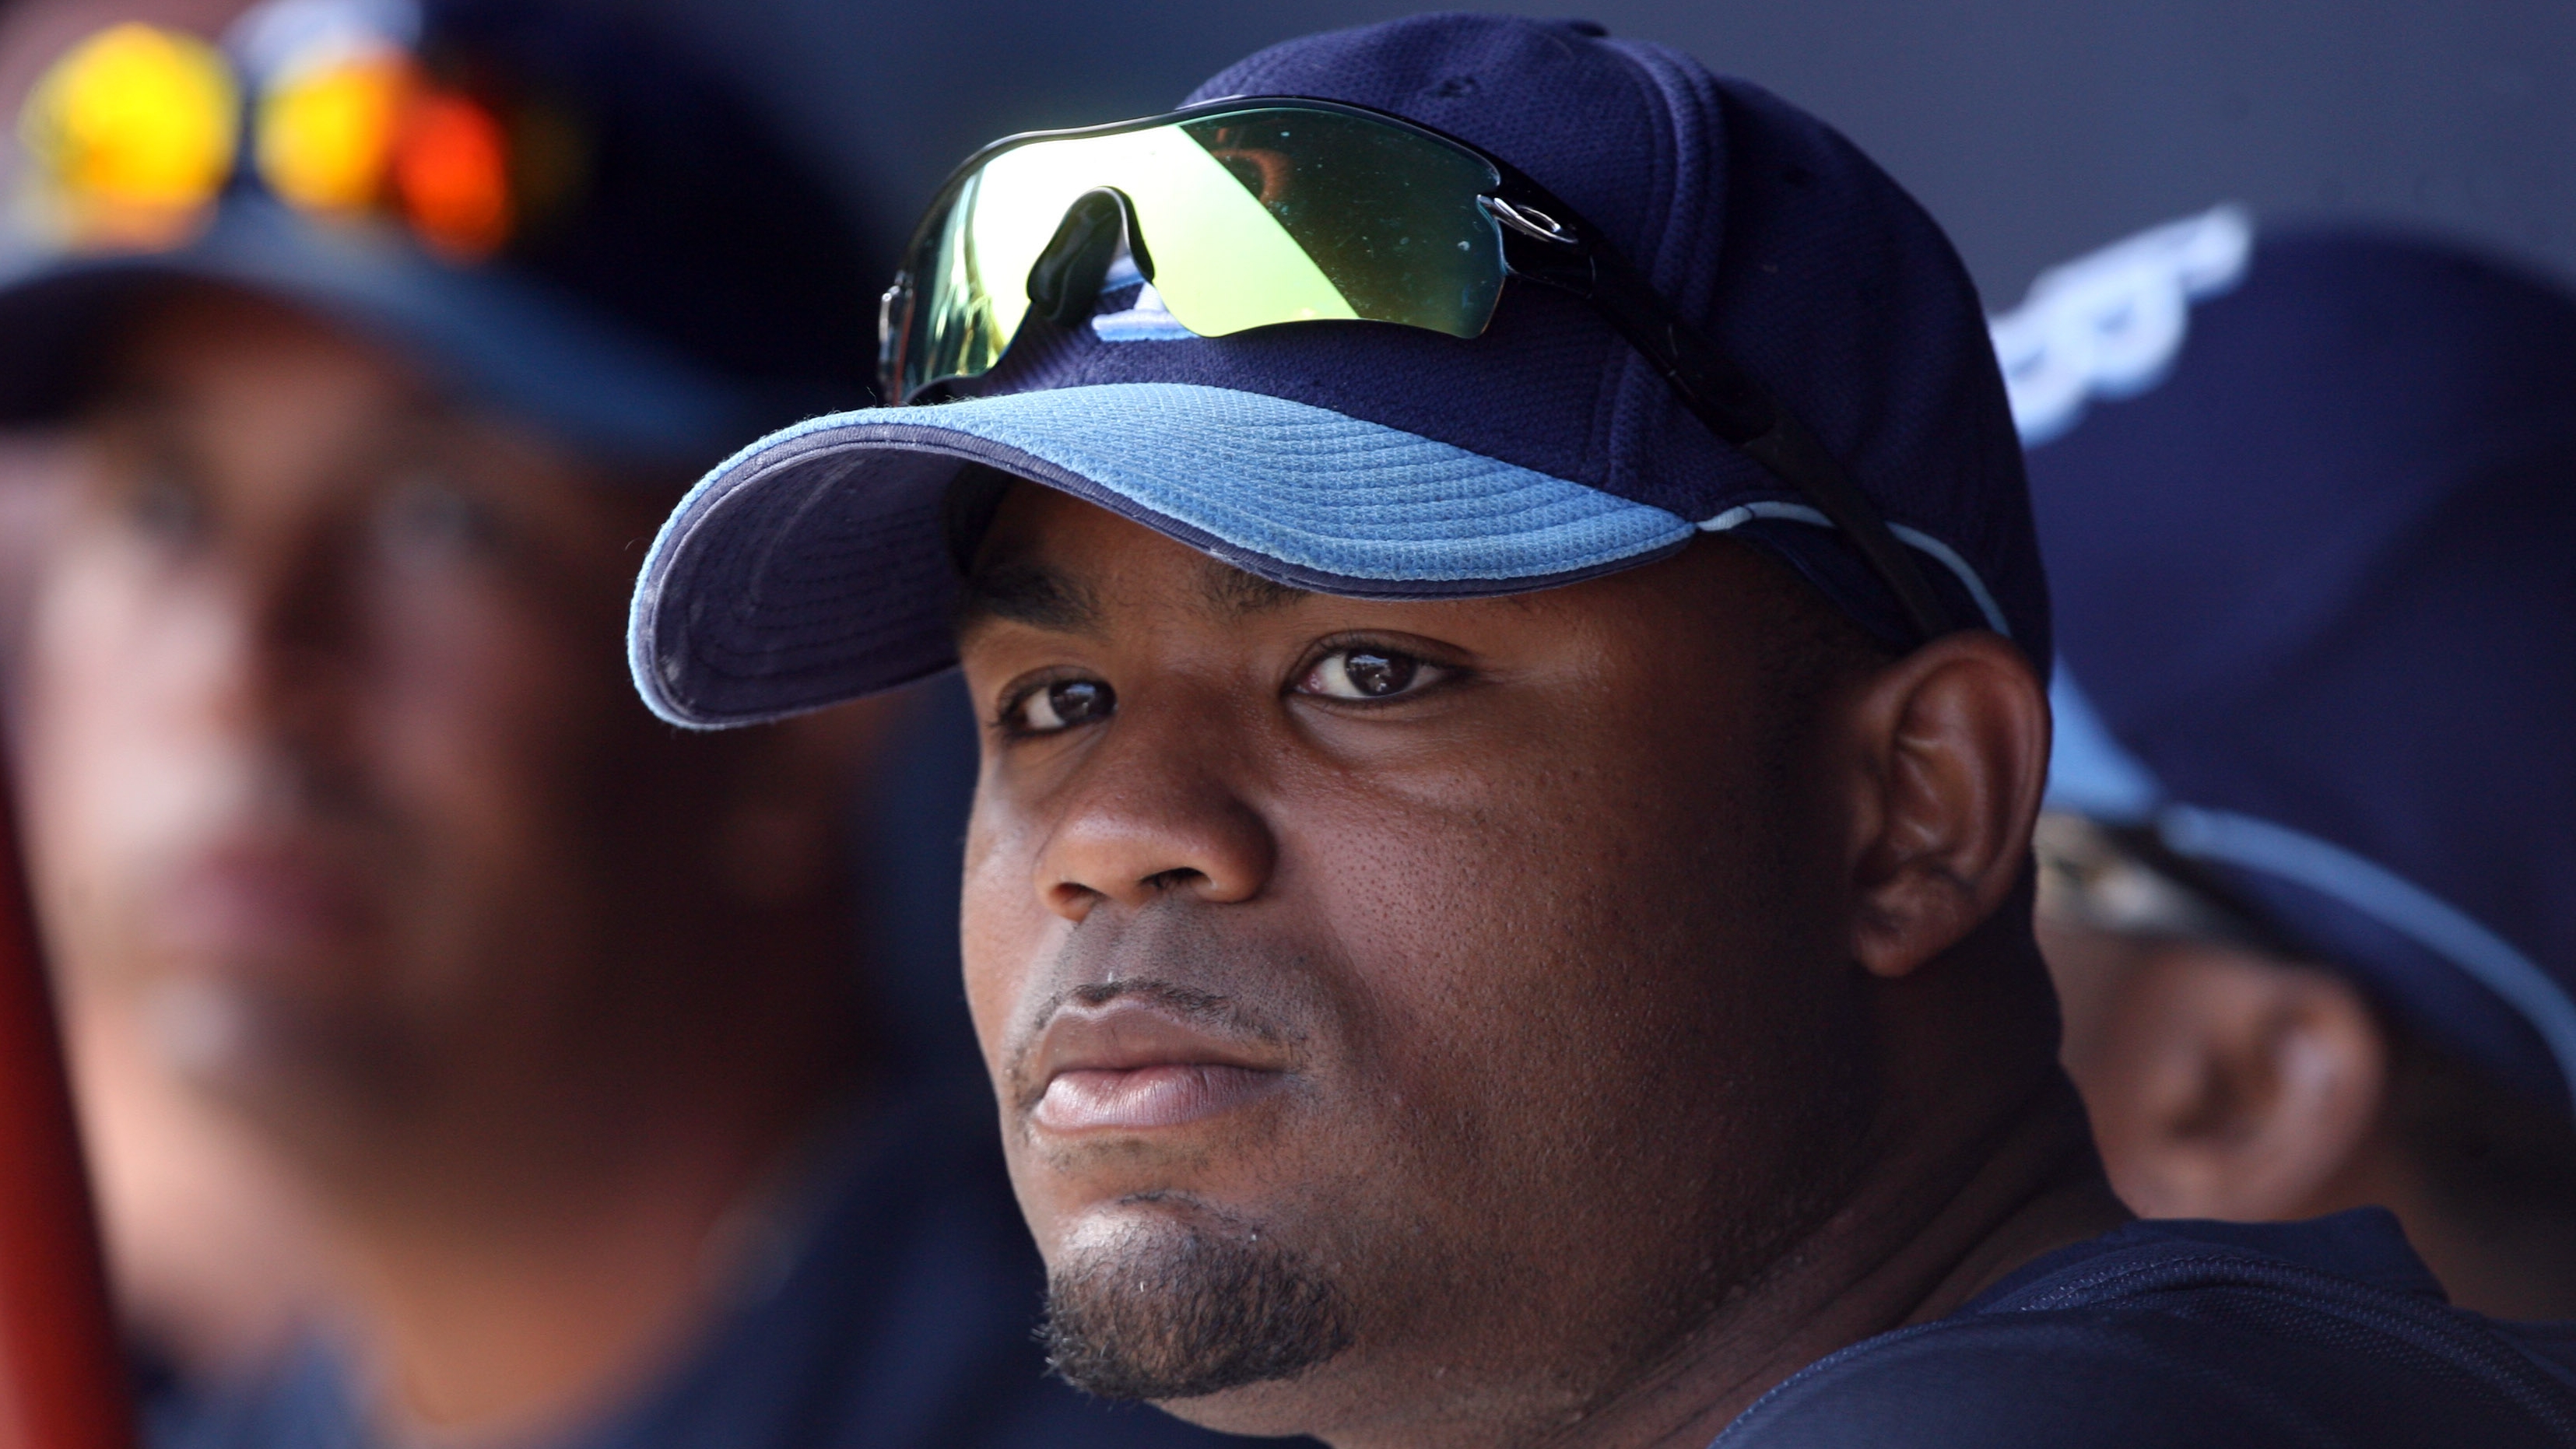 Homegrown Carl Crawford set to be inducted into Rays' Hall of Fame